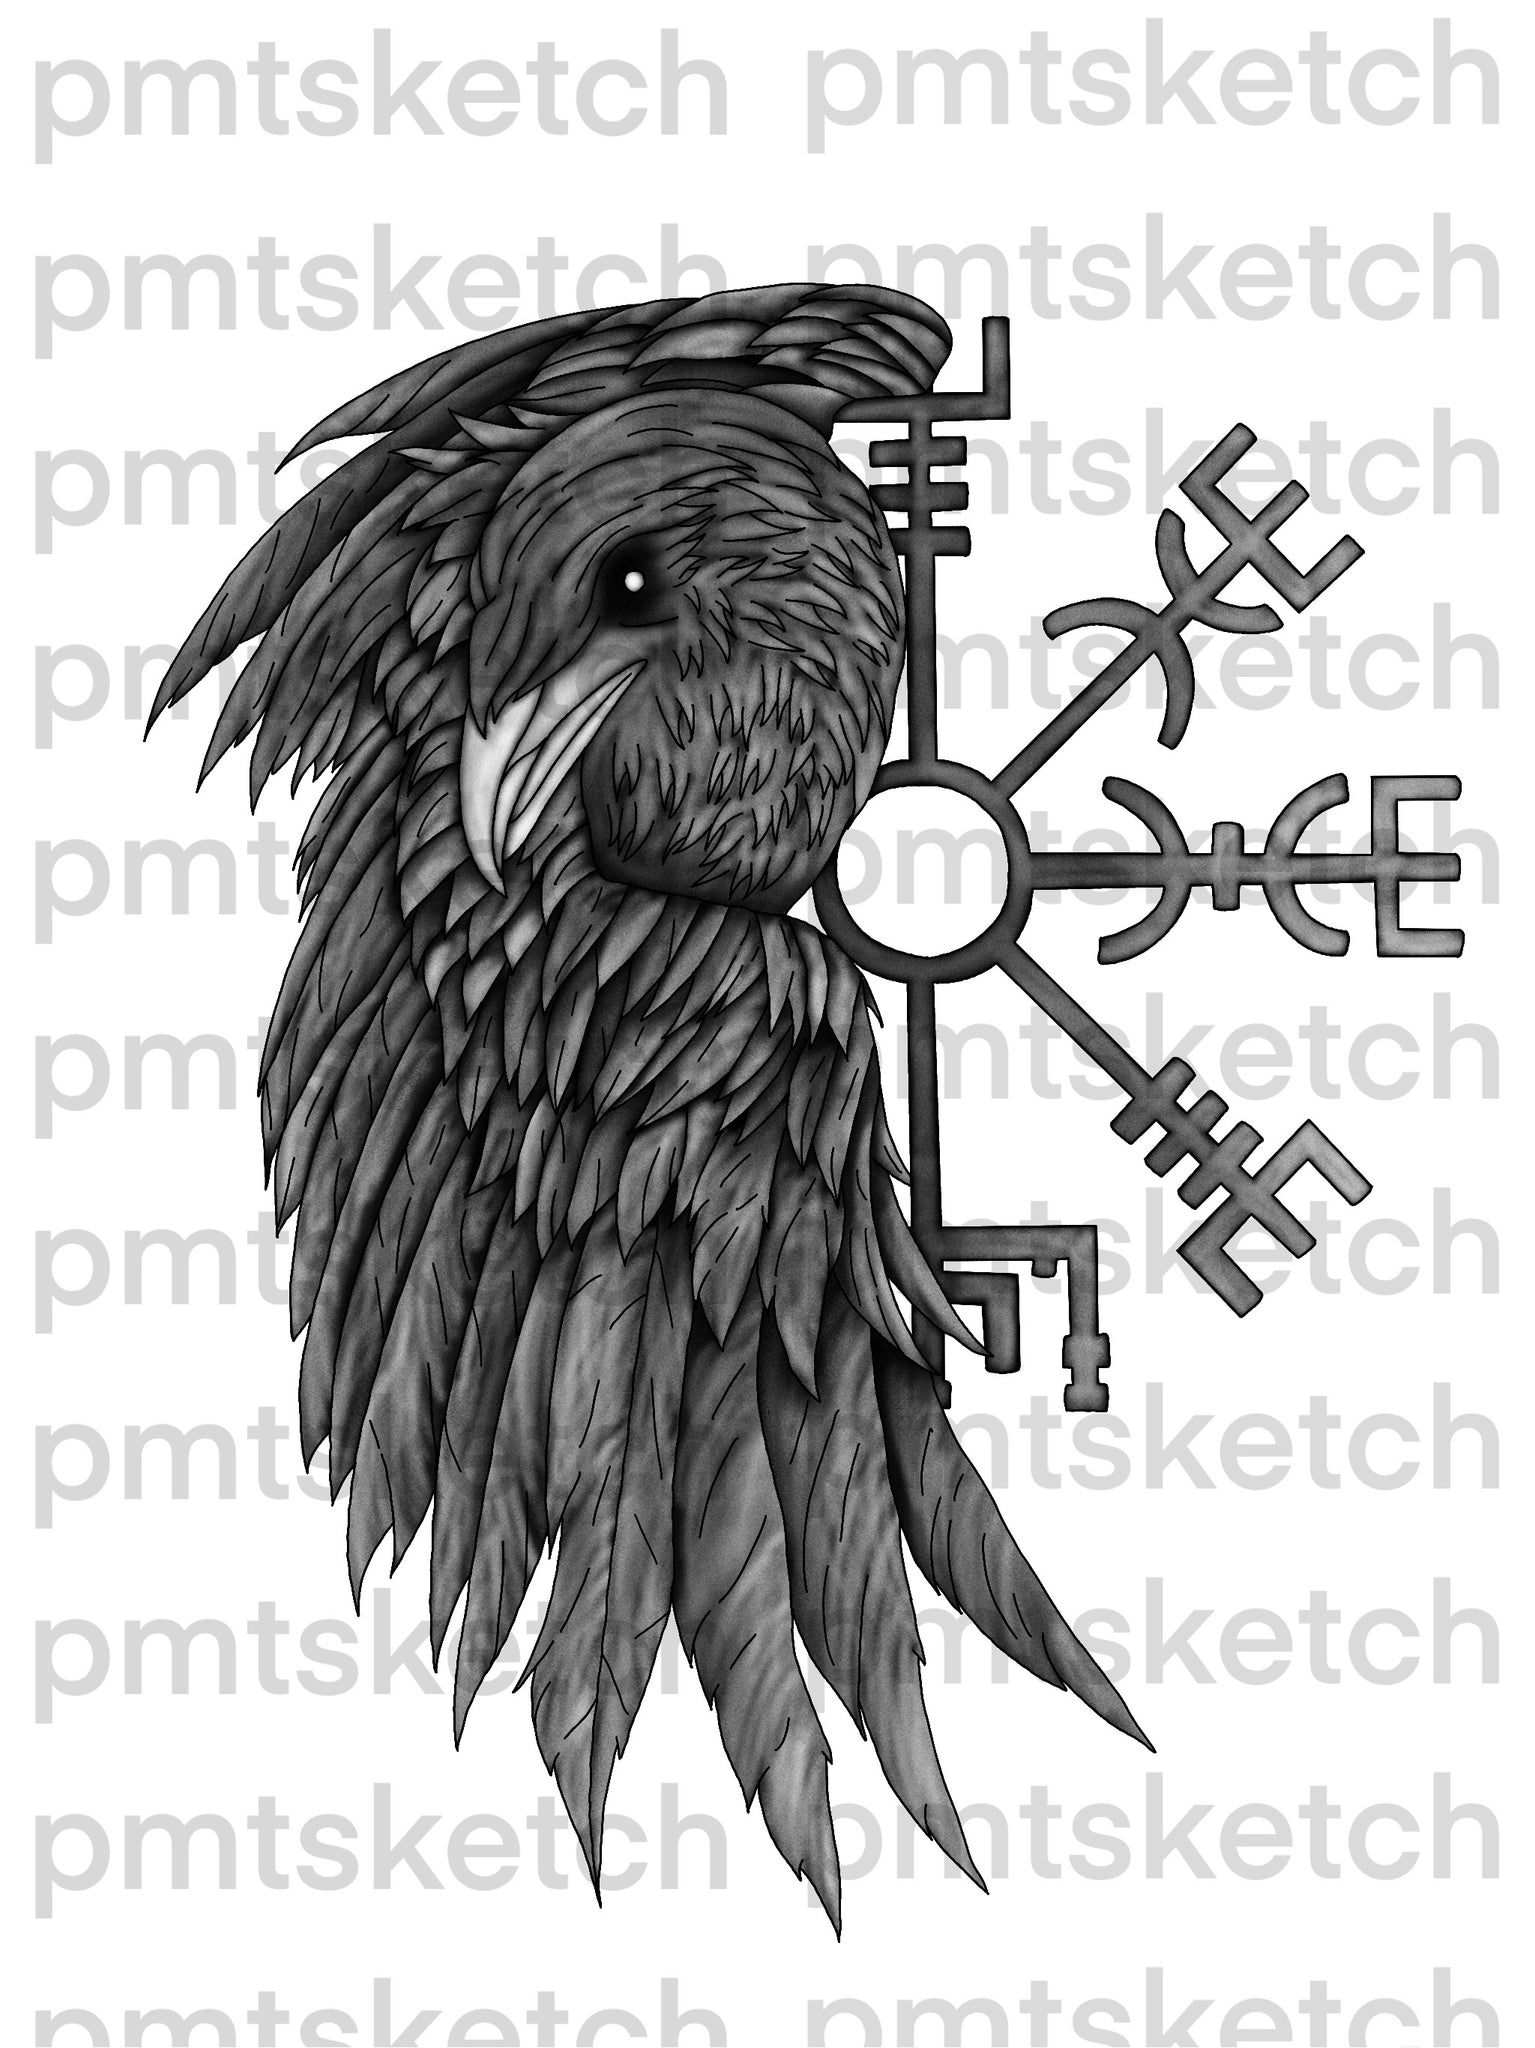 Shaded Raven / Norse